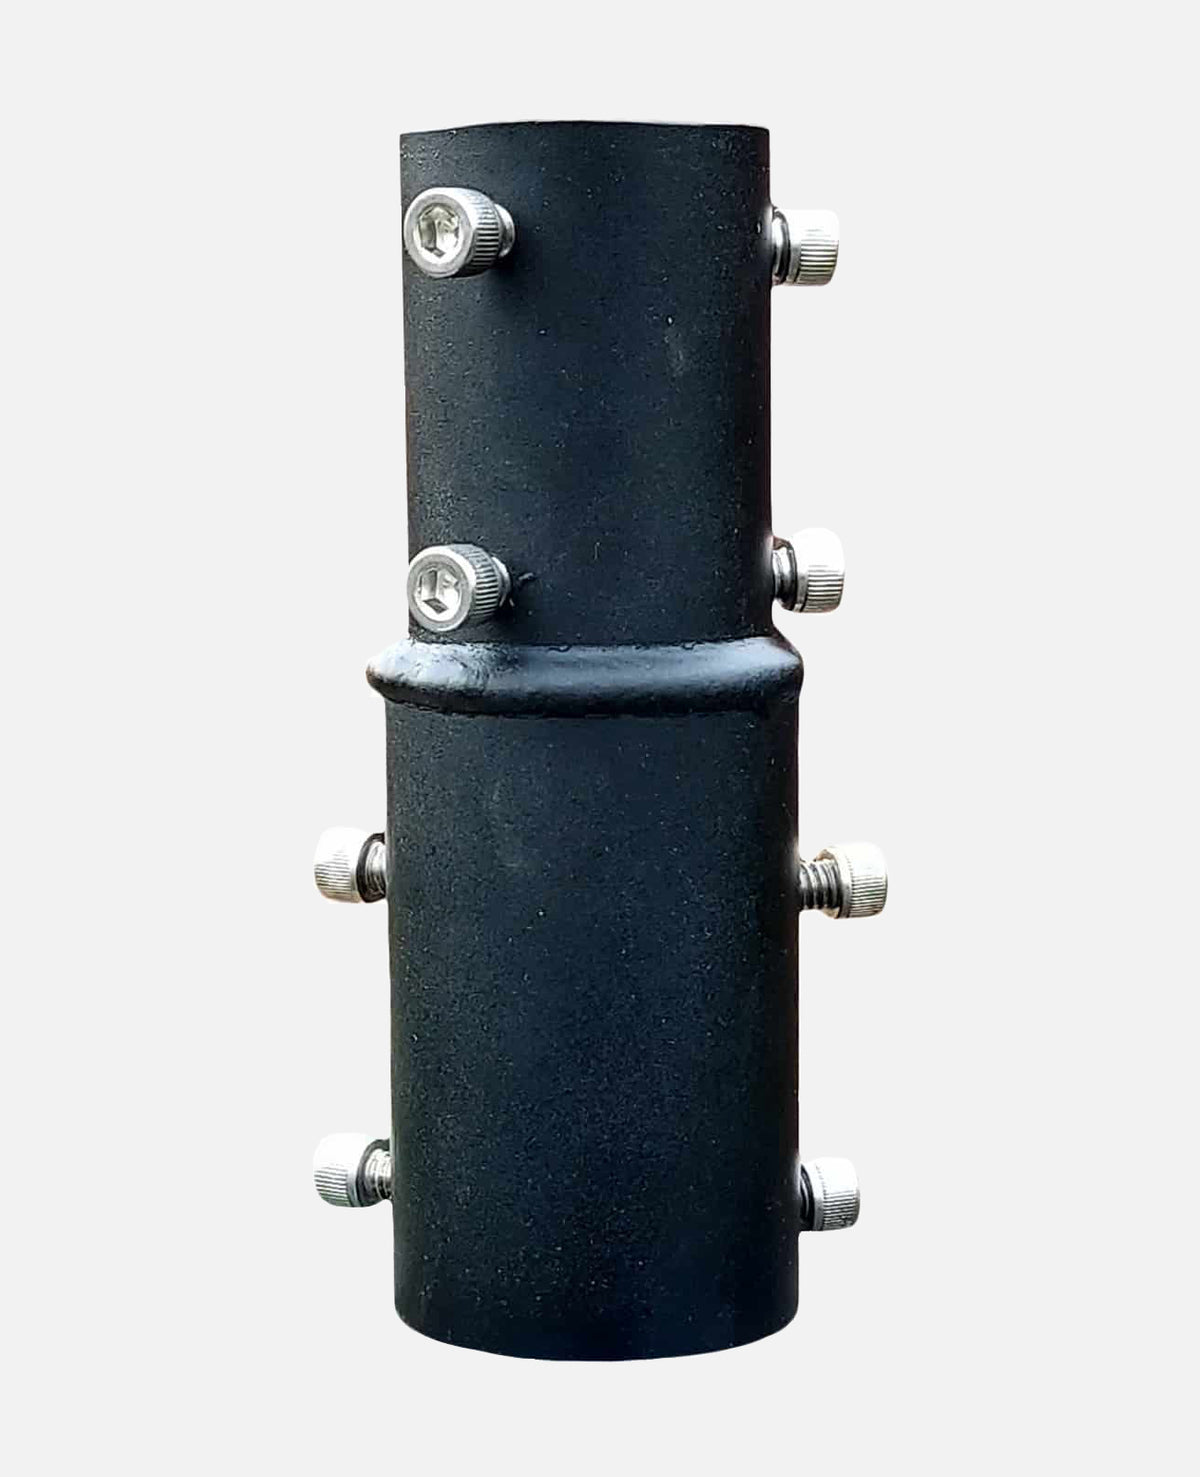 1 5/8" OD Starlink Quick Pipe Adapter for V2 Square Starlink Dish